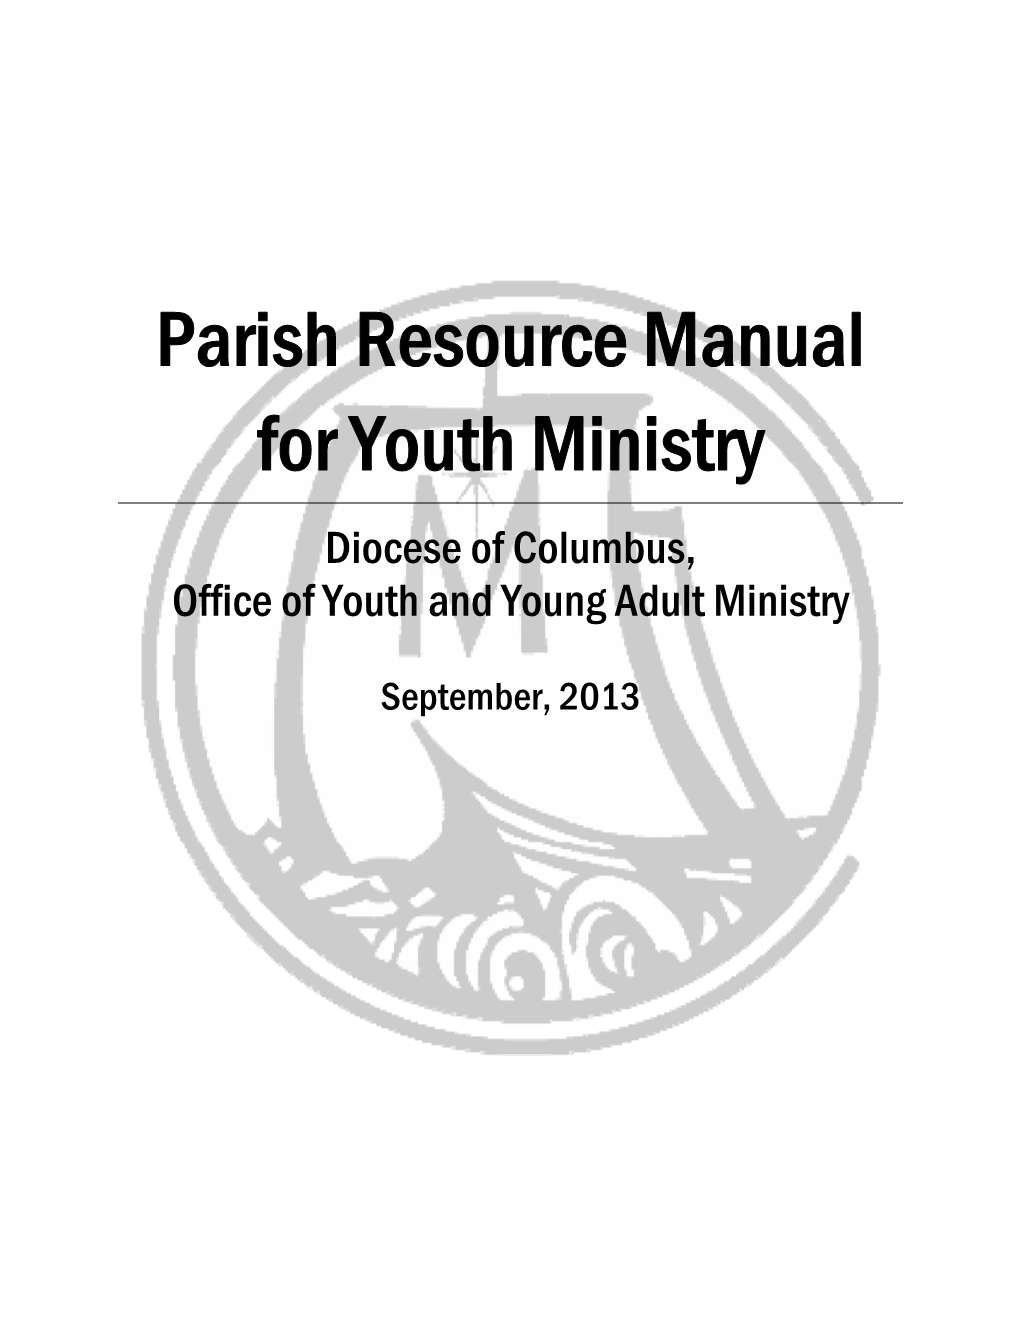 Parish Resource Manual for Youth Ministry Diocese of Columbus, Office of Youth and Young Adult Ministry